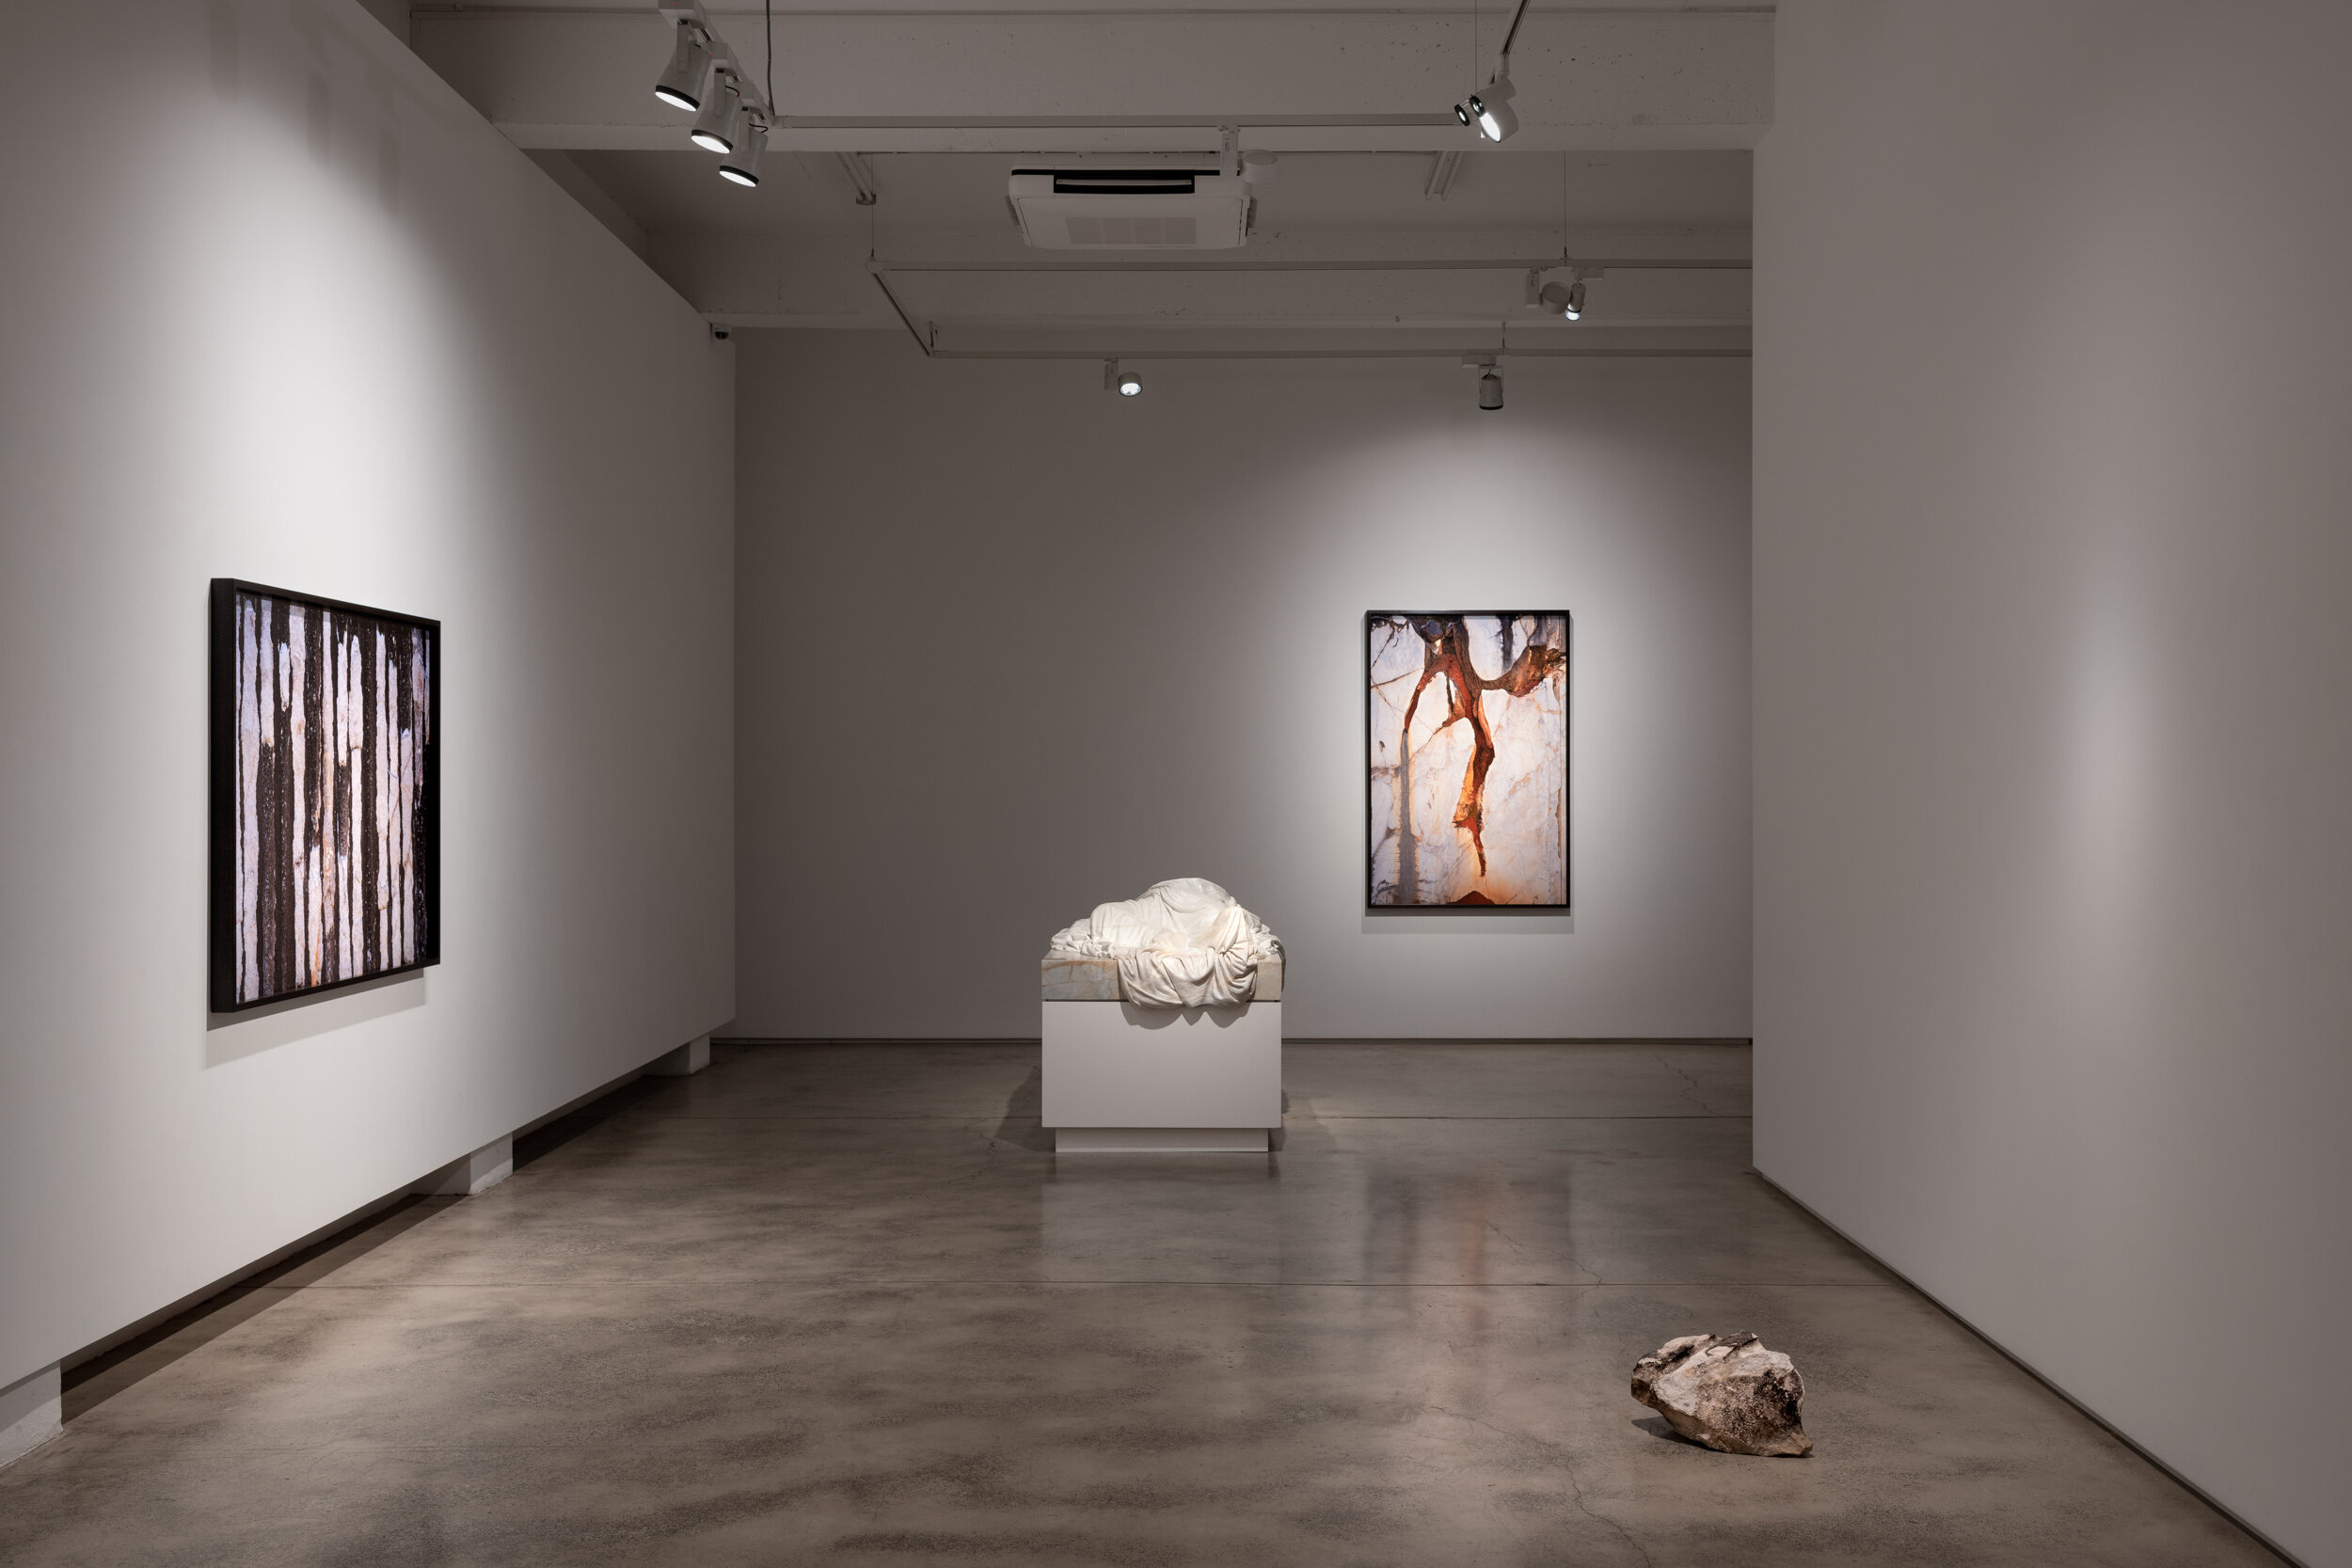  Meet Me Under The Dome, Sullivan+Strumpf, Sydney. 2020  L-R: T he Memory Of Wounds , 2020. Pigment Print On Cotton Rag; 170 X 113 Cm; Edition Of 3 + 2 AP;  A History Of Forgetting , 2020. Pigment Print On Cotton Rag; 170 X 113 Cm; Edition Of 3 + 2 A